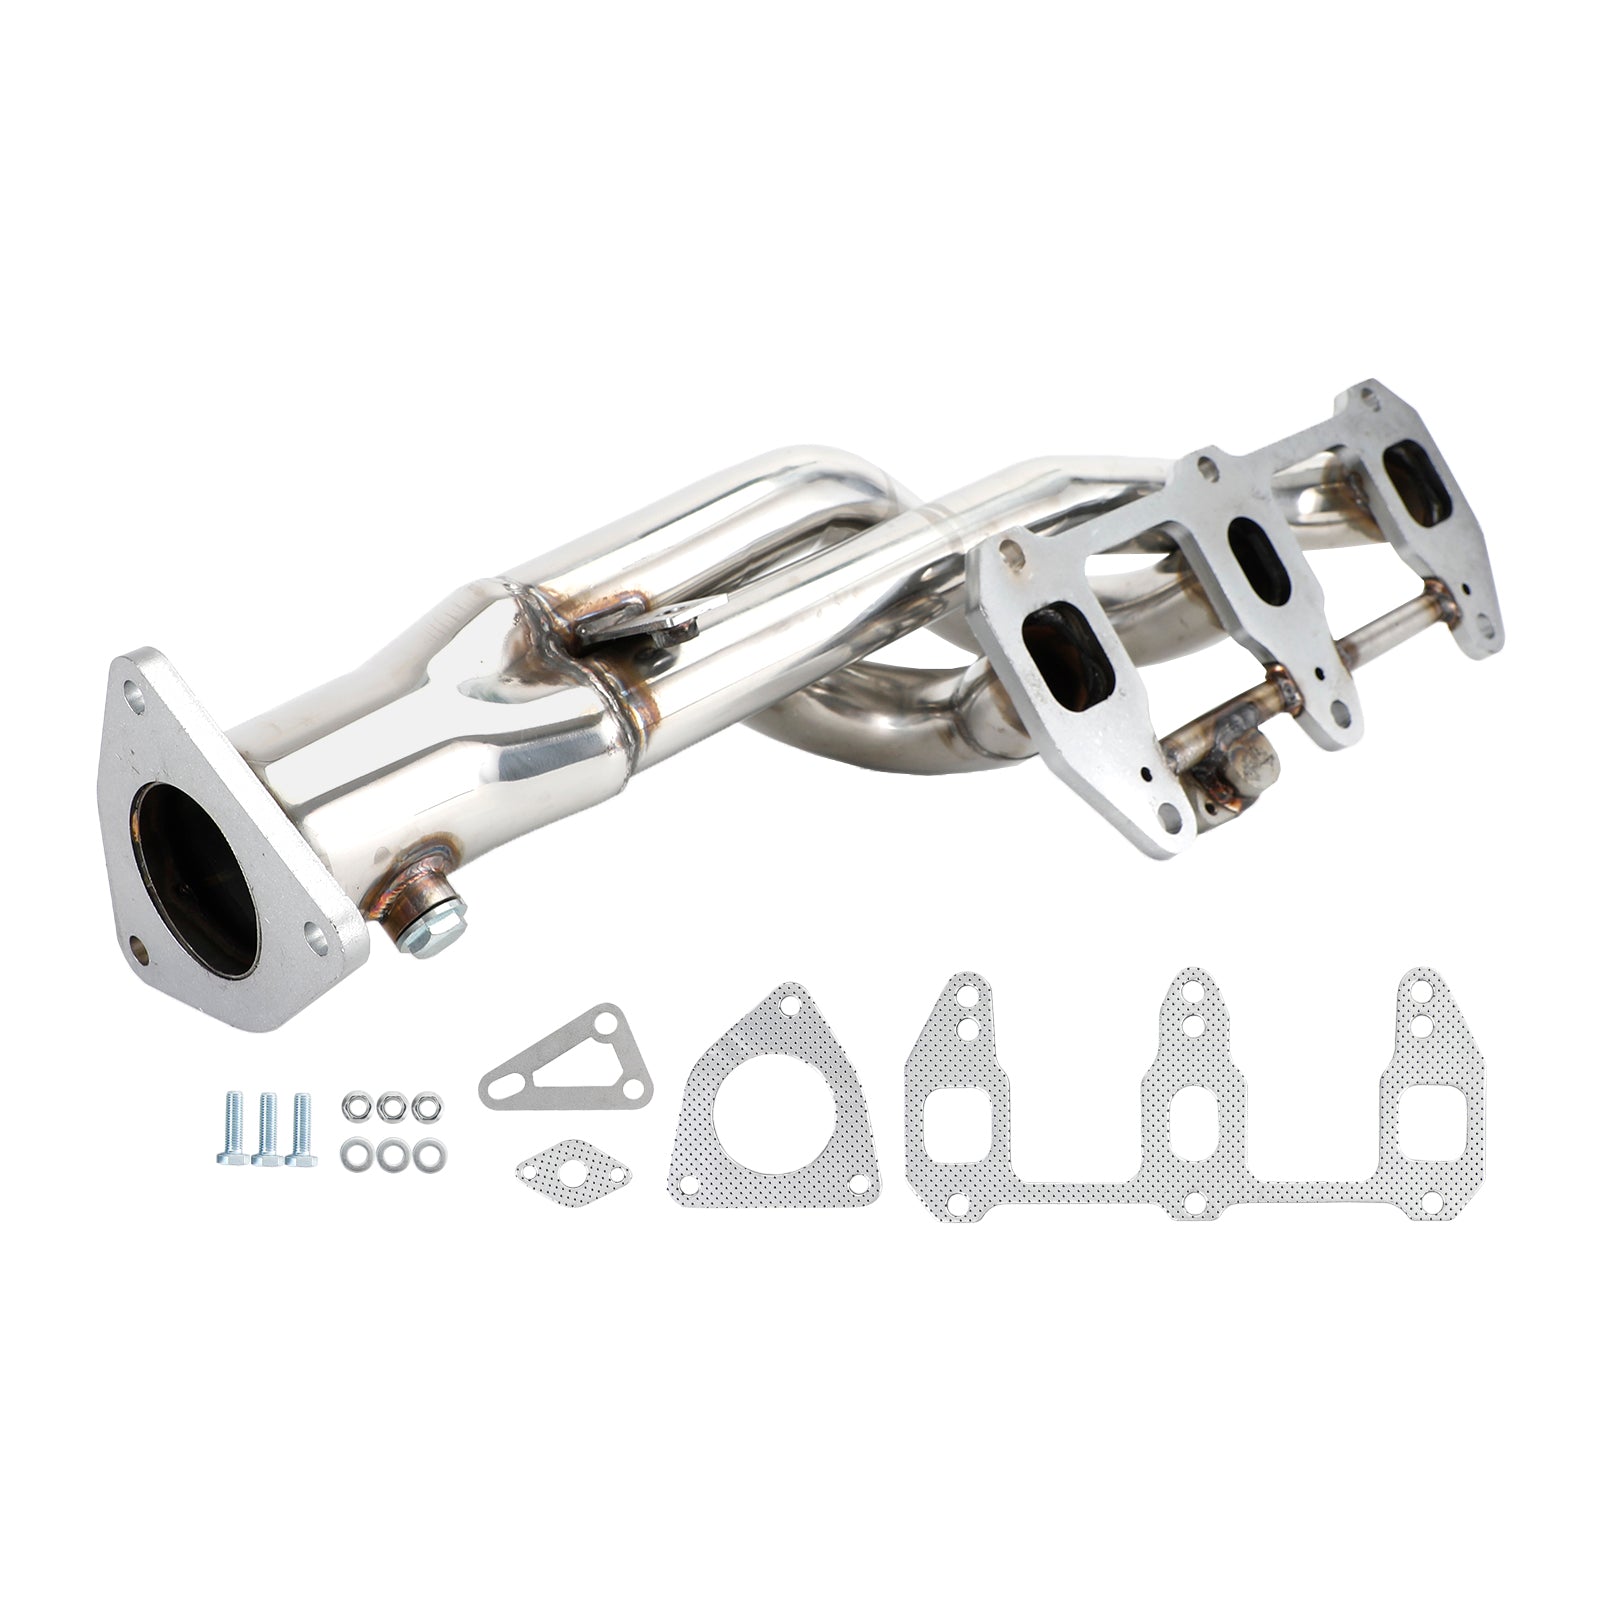 Mazda 2004-2011 RX8 RX-8 R3 GT Grand Stainless steel Exhaust Header